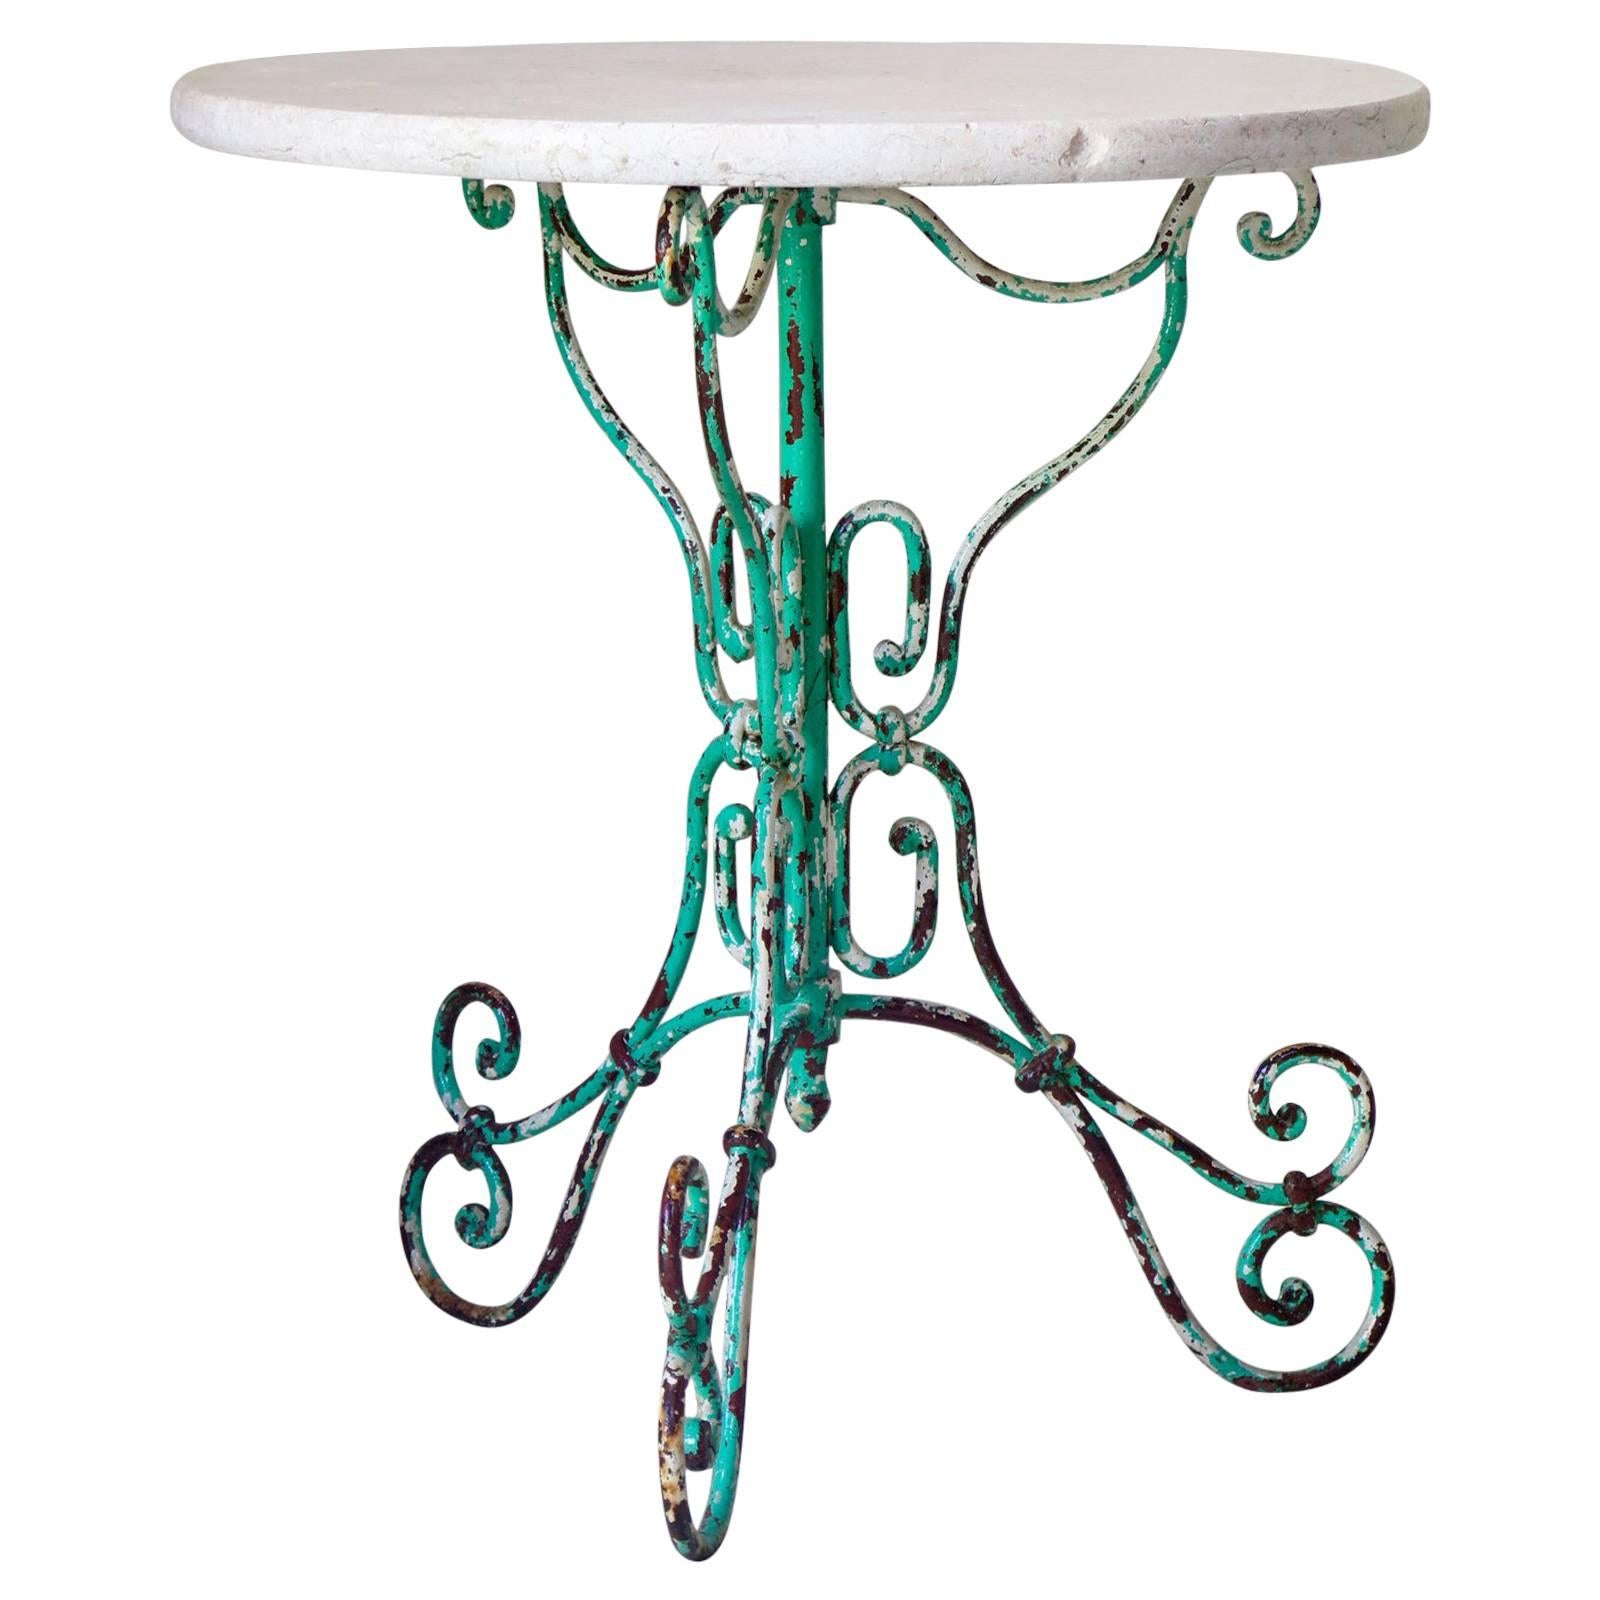 Painted Wrought Iron and Marble Gueridon Table, France, circa 1920s